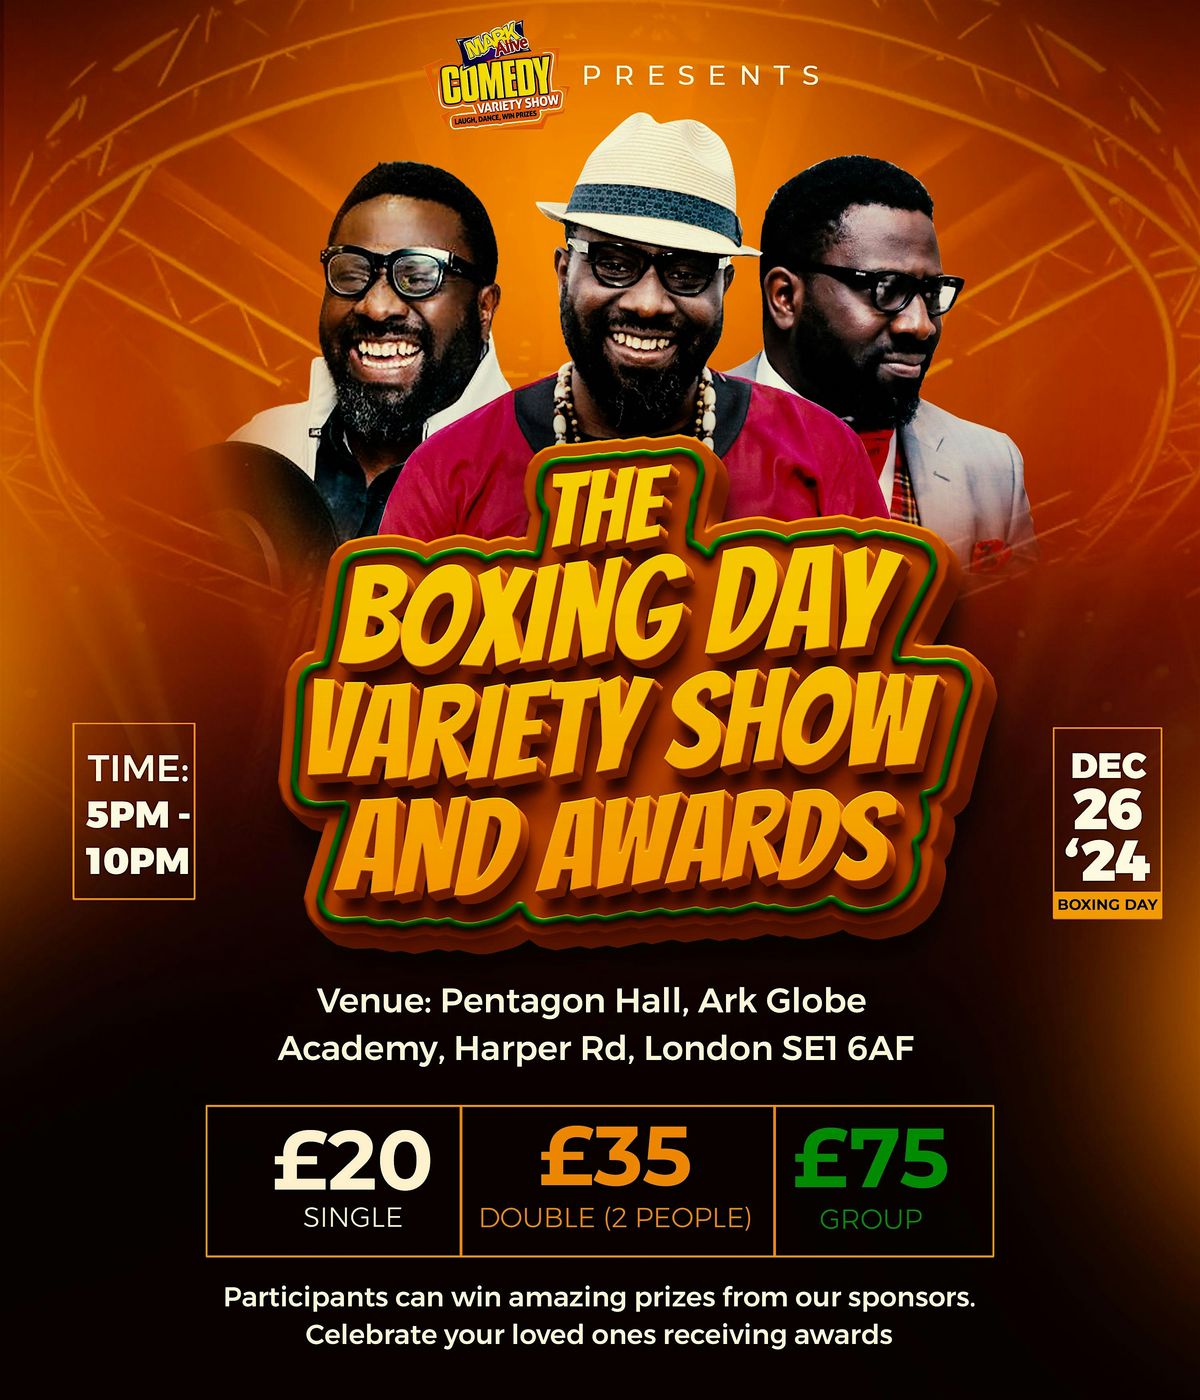 THE BOXING DAY VARIETY SHOW & AWARDS